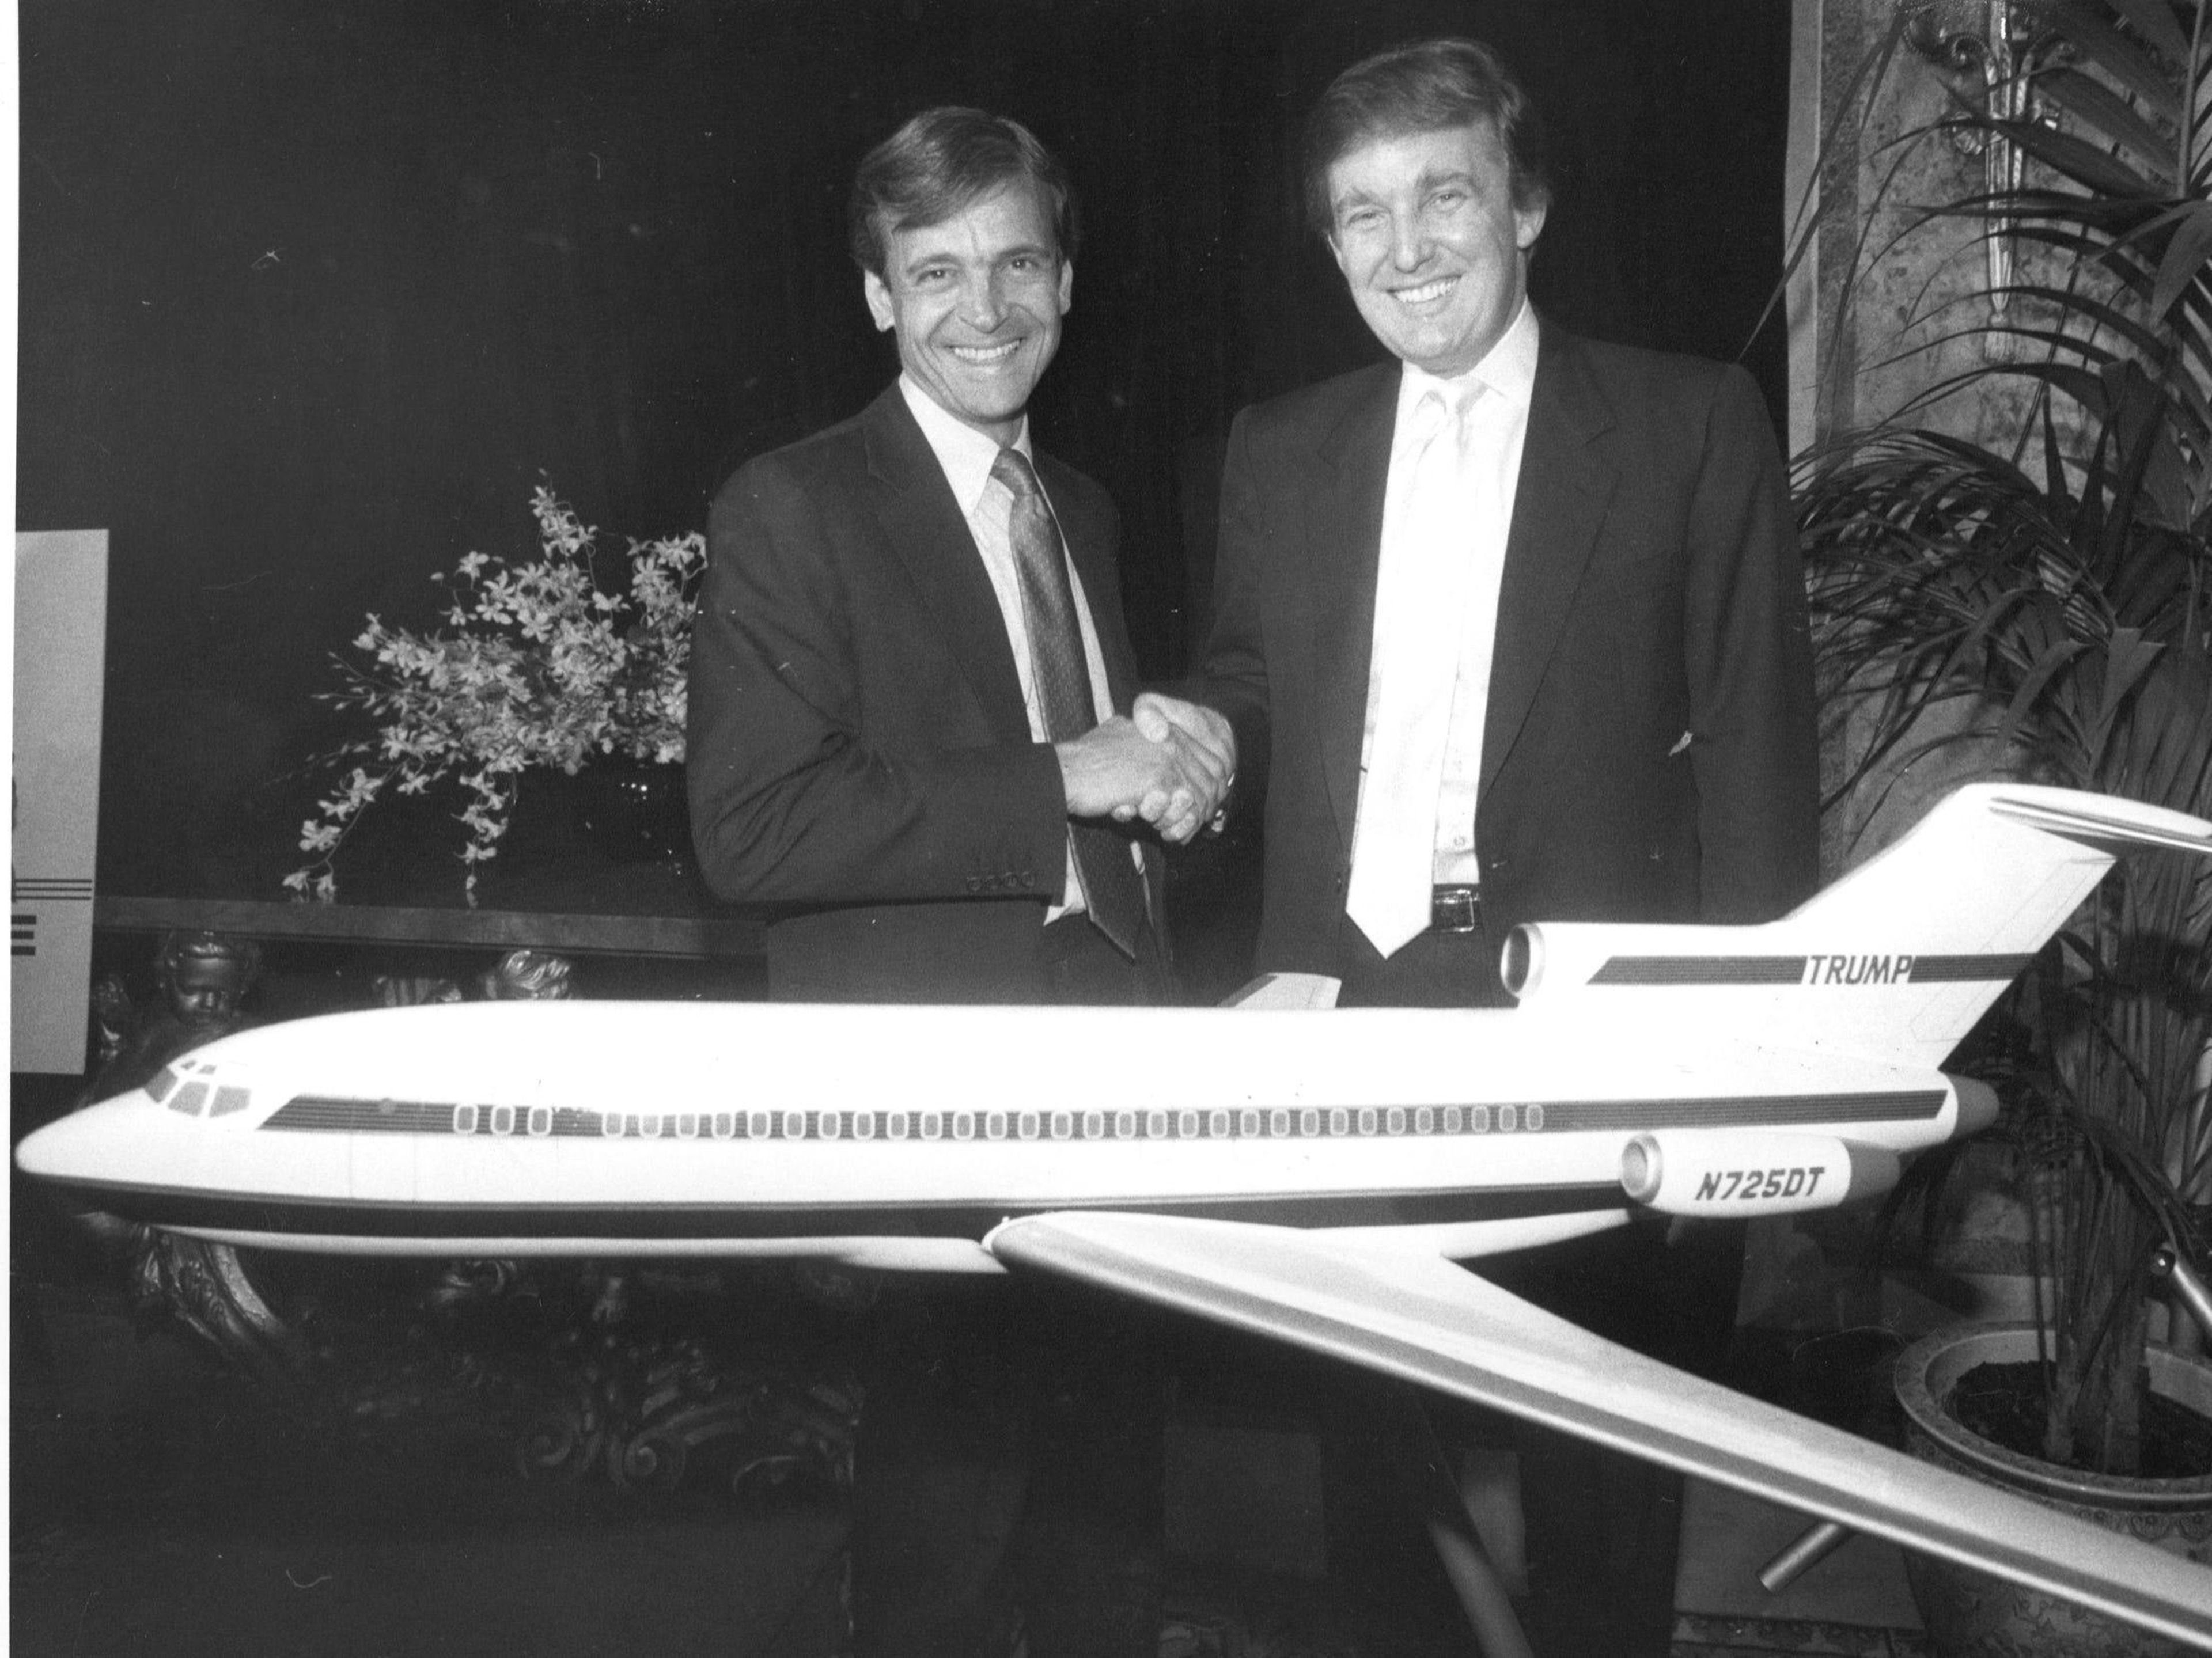 Donald Trump and a model of his airline's Boeing 727 aircraft. Michael Schwartz/New York Post Archives /(c) NYP Holdings, Inc./Getty